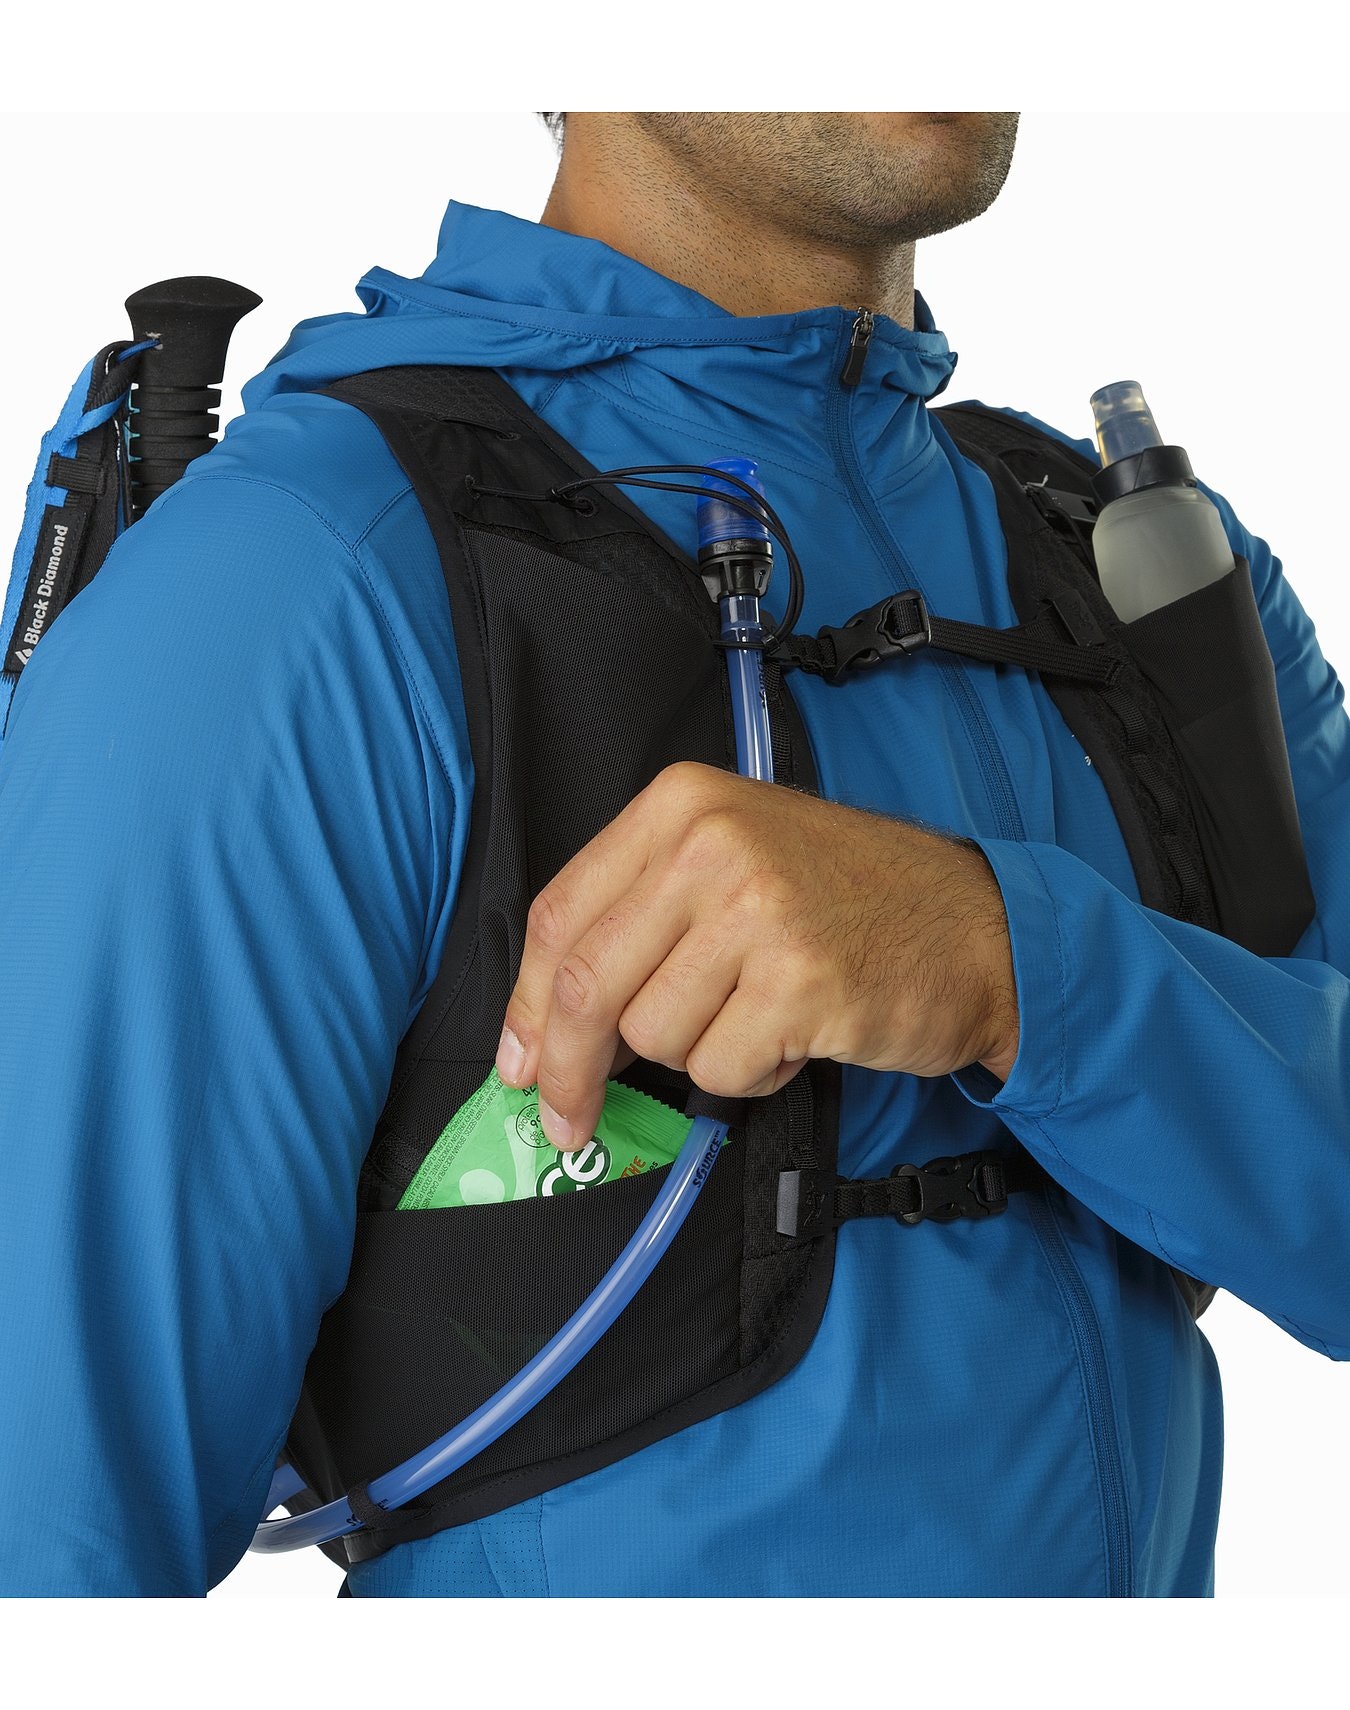 Arc'teryx Norvan 14 Hydration Vest review | Trek and Mountain